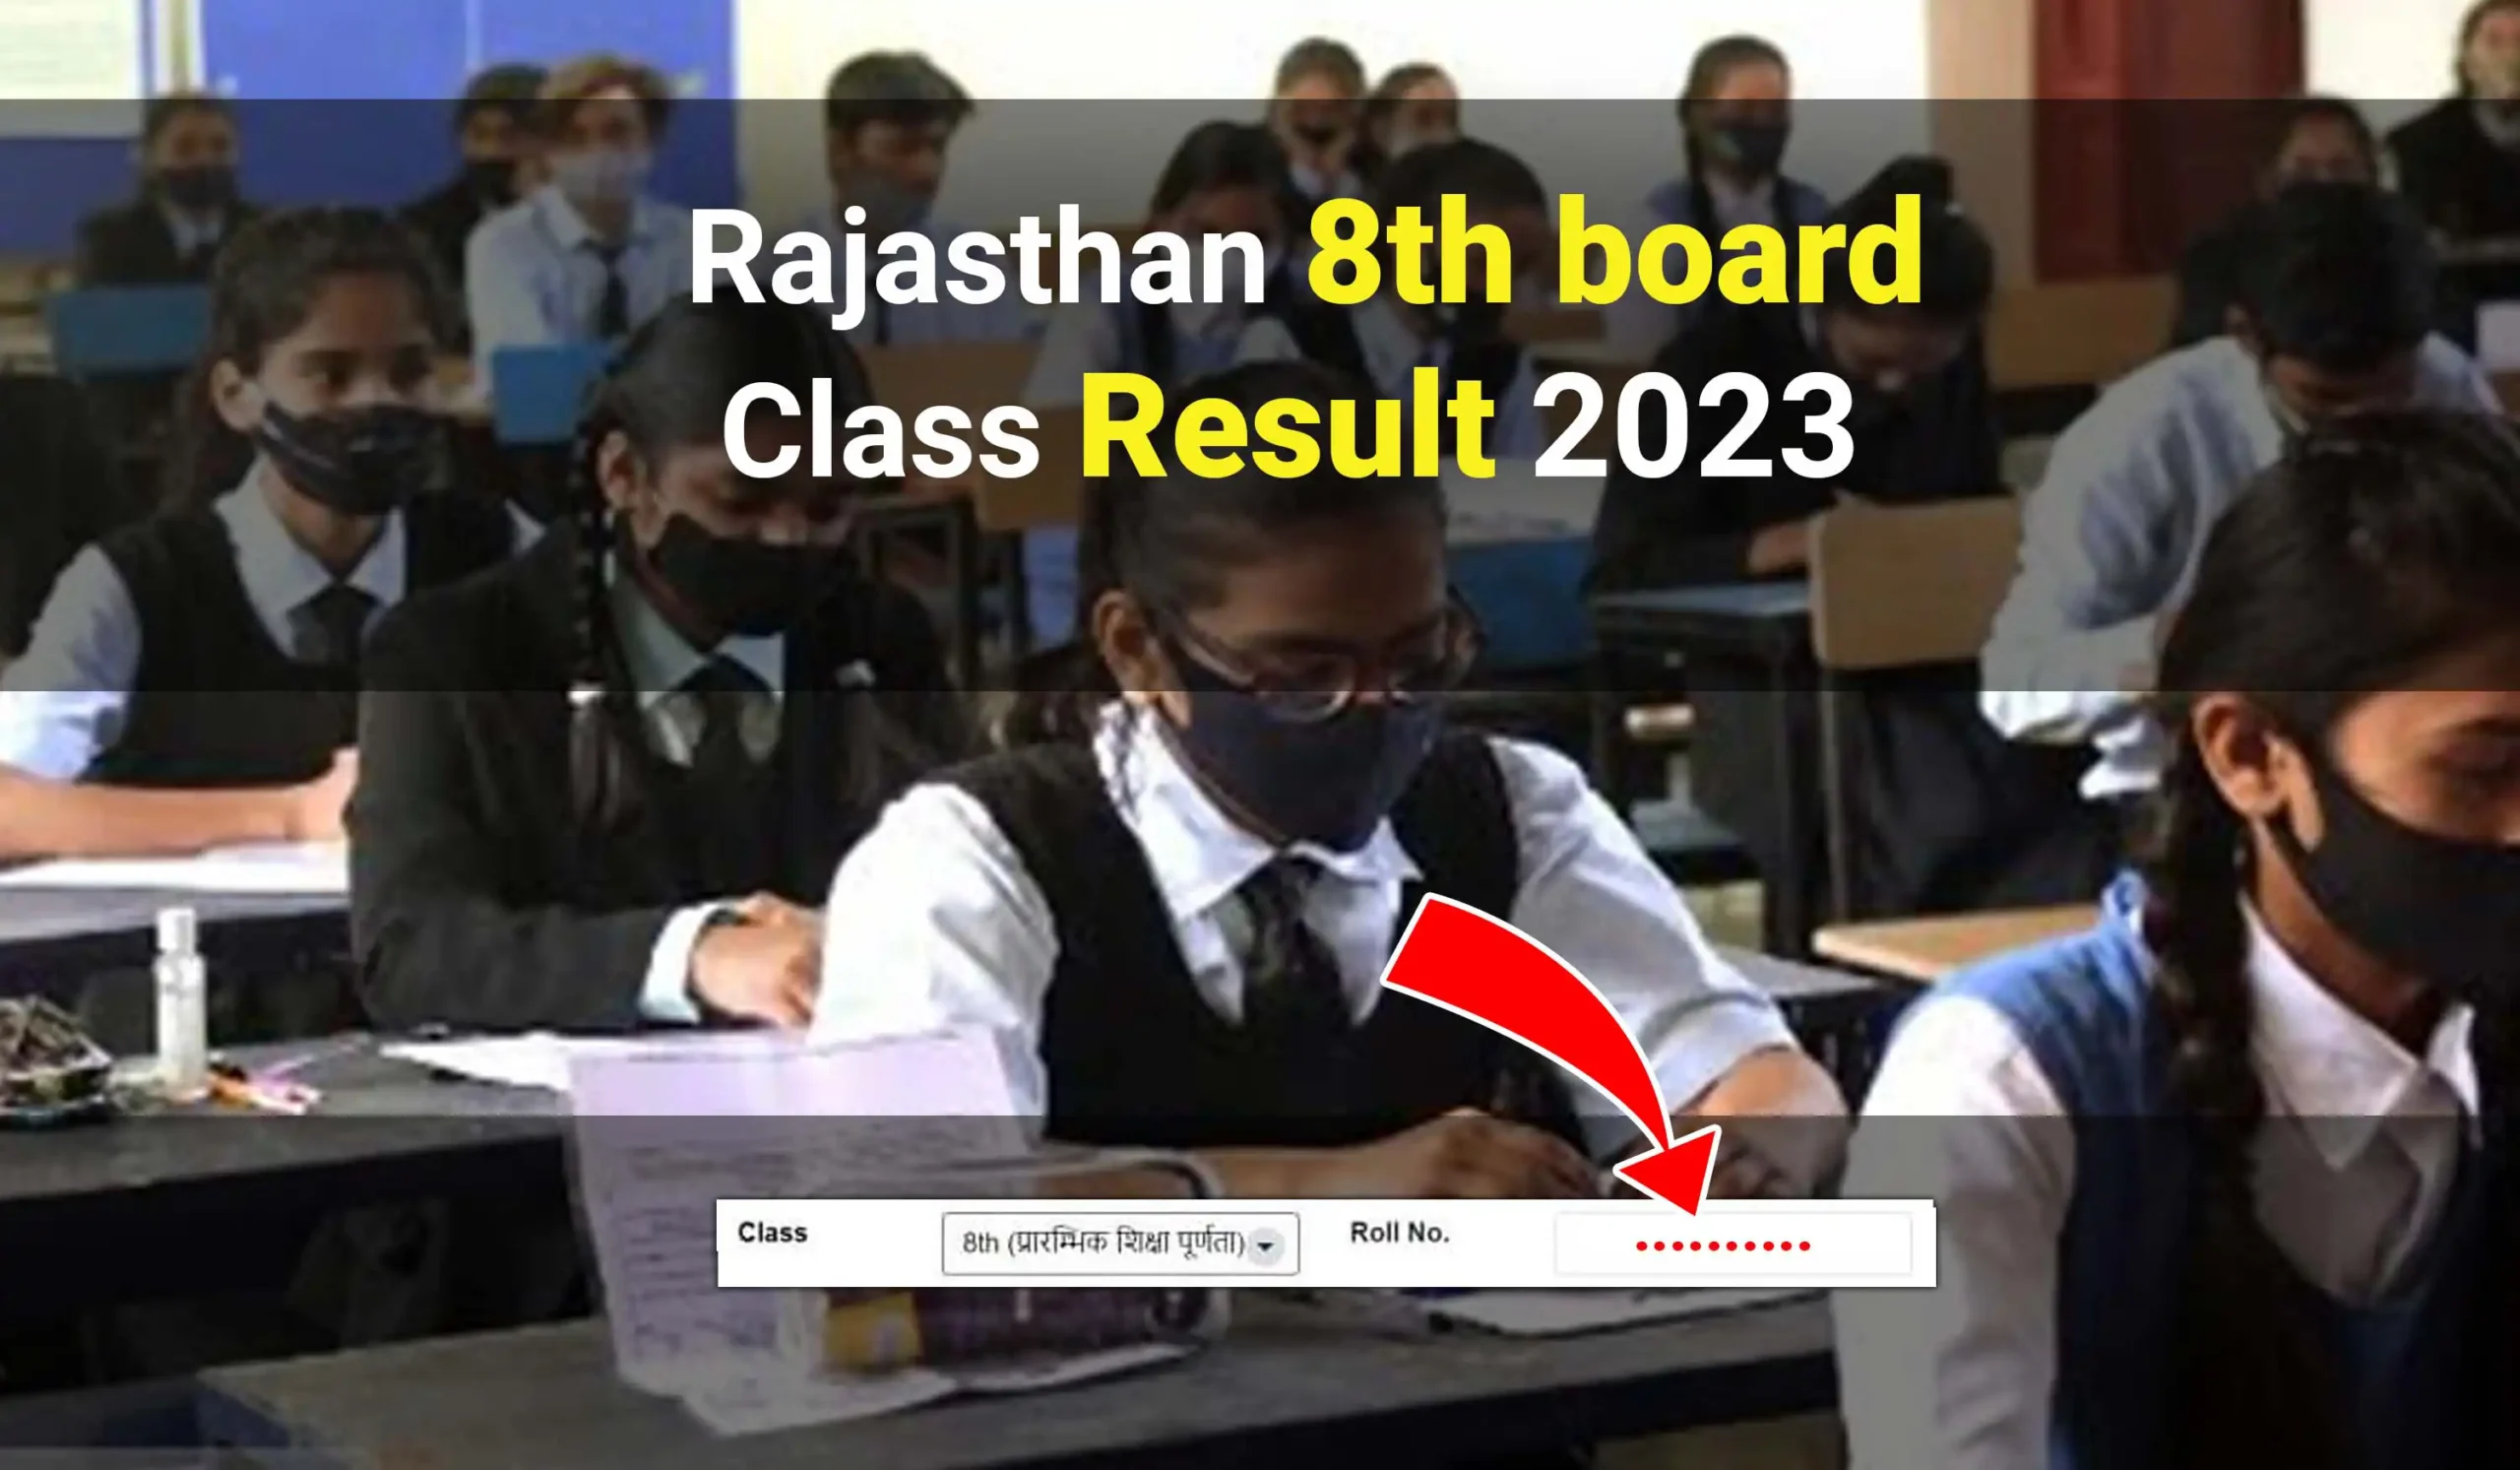 Rajasthan 8th class result 2023 e